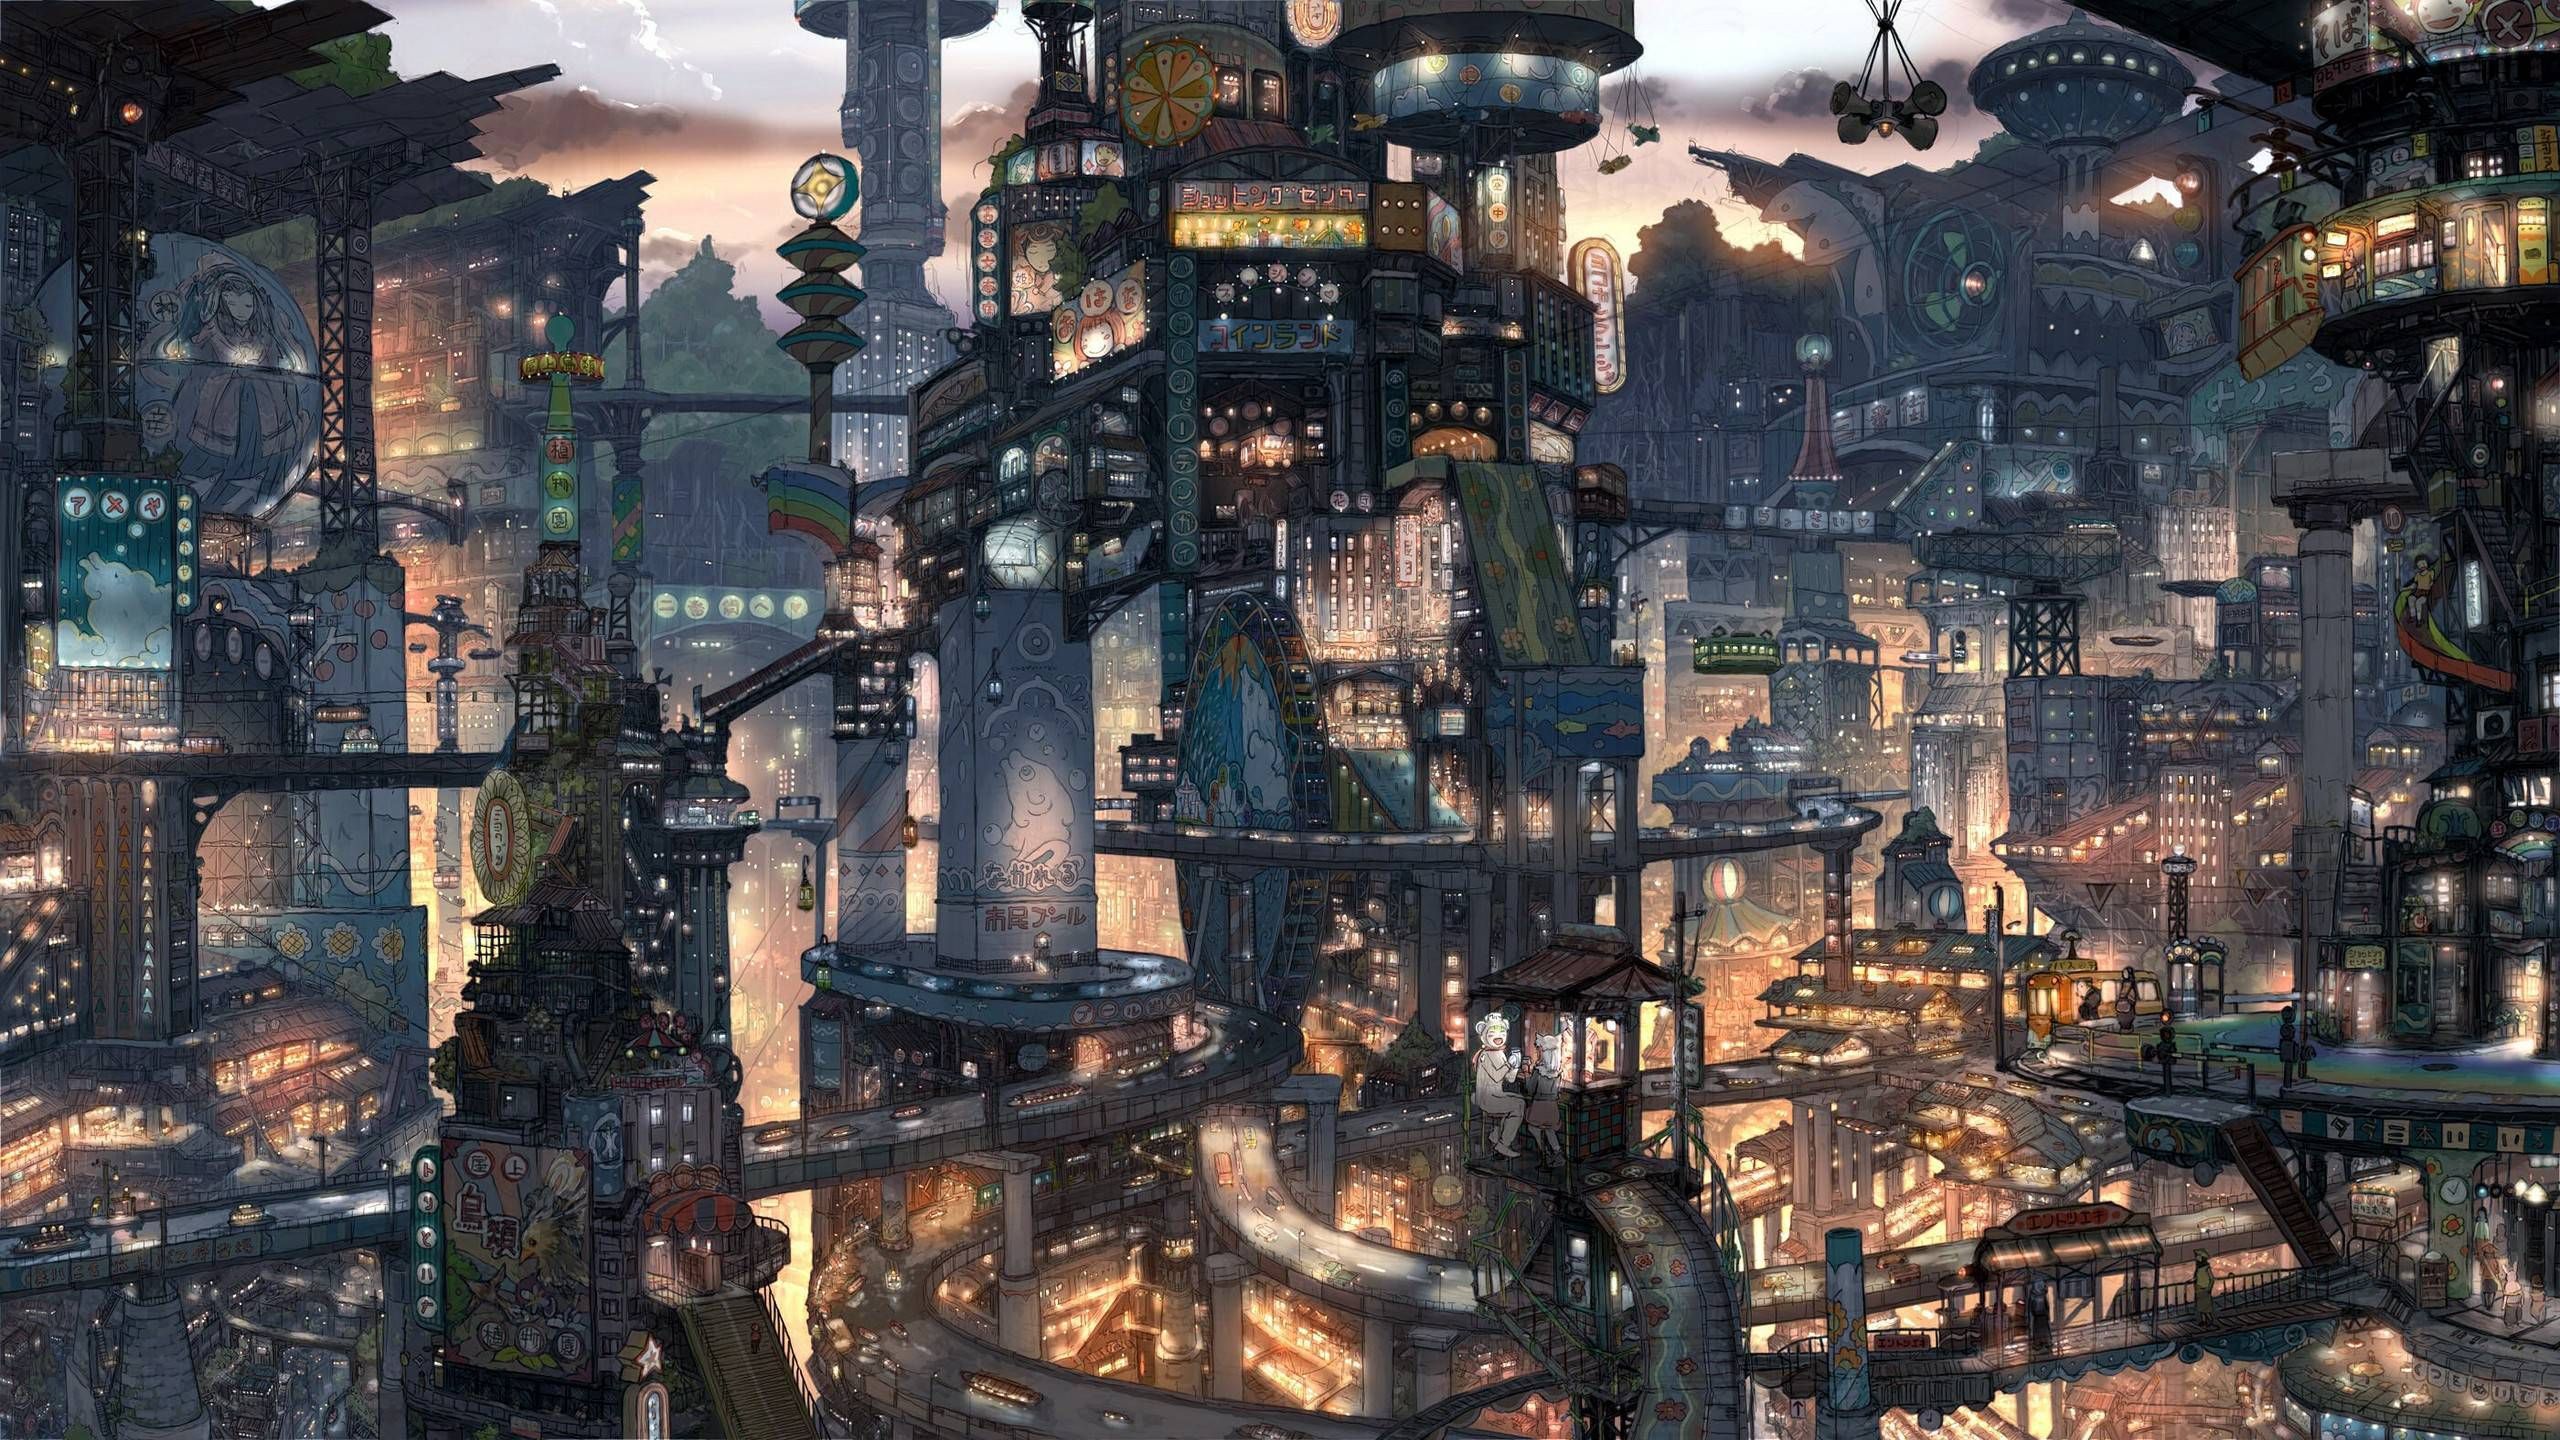 Cityscapes artwork anime style wallpaper - Quality